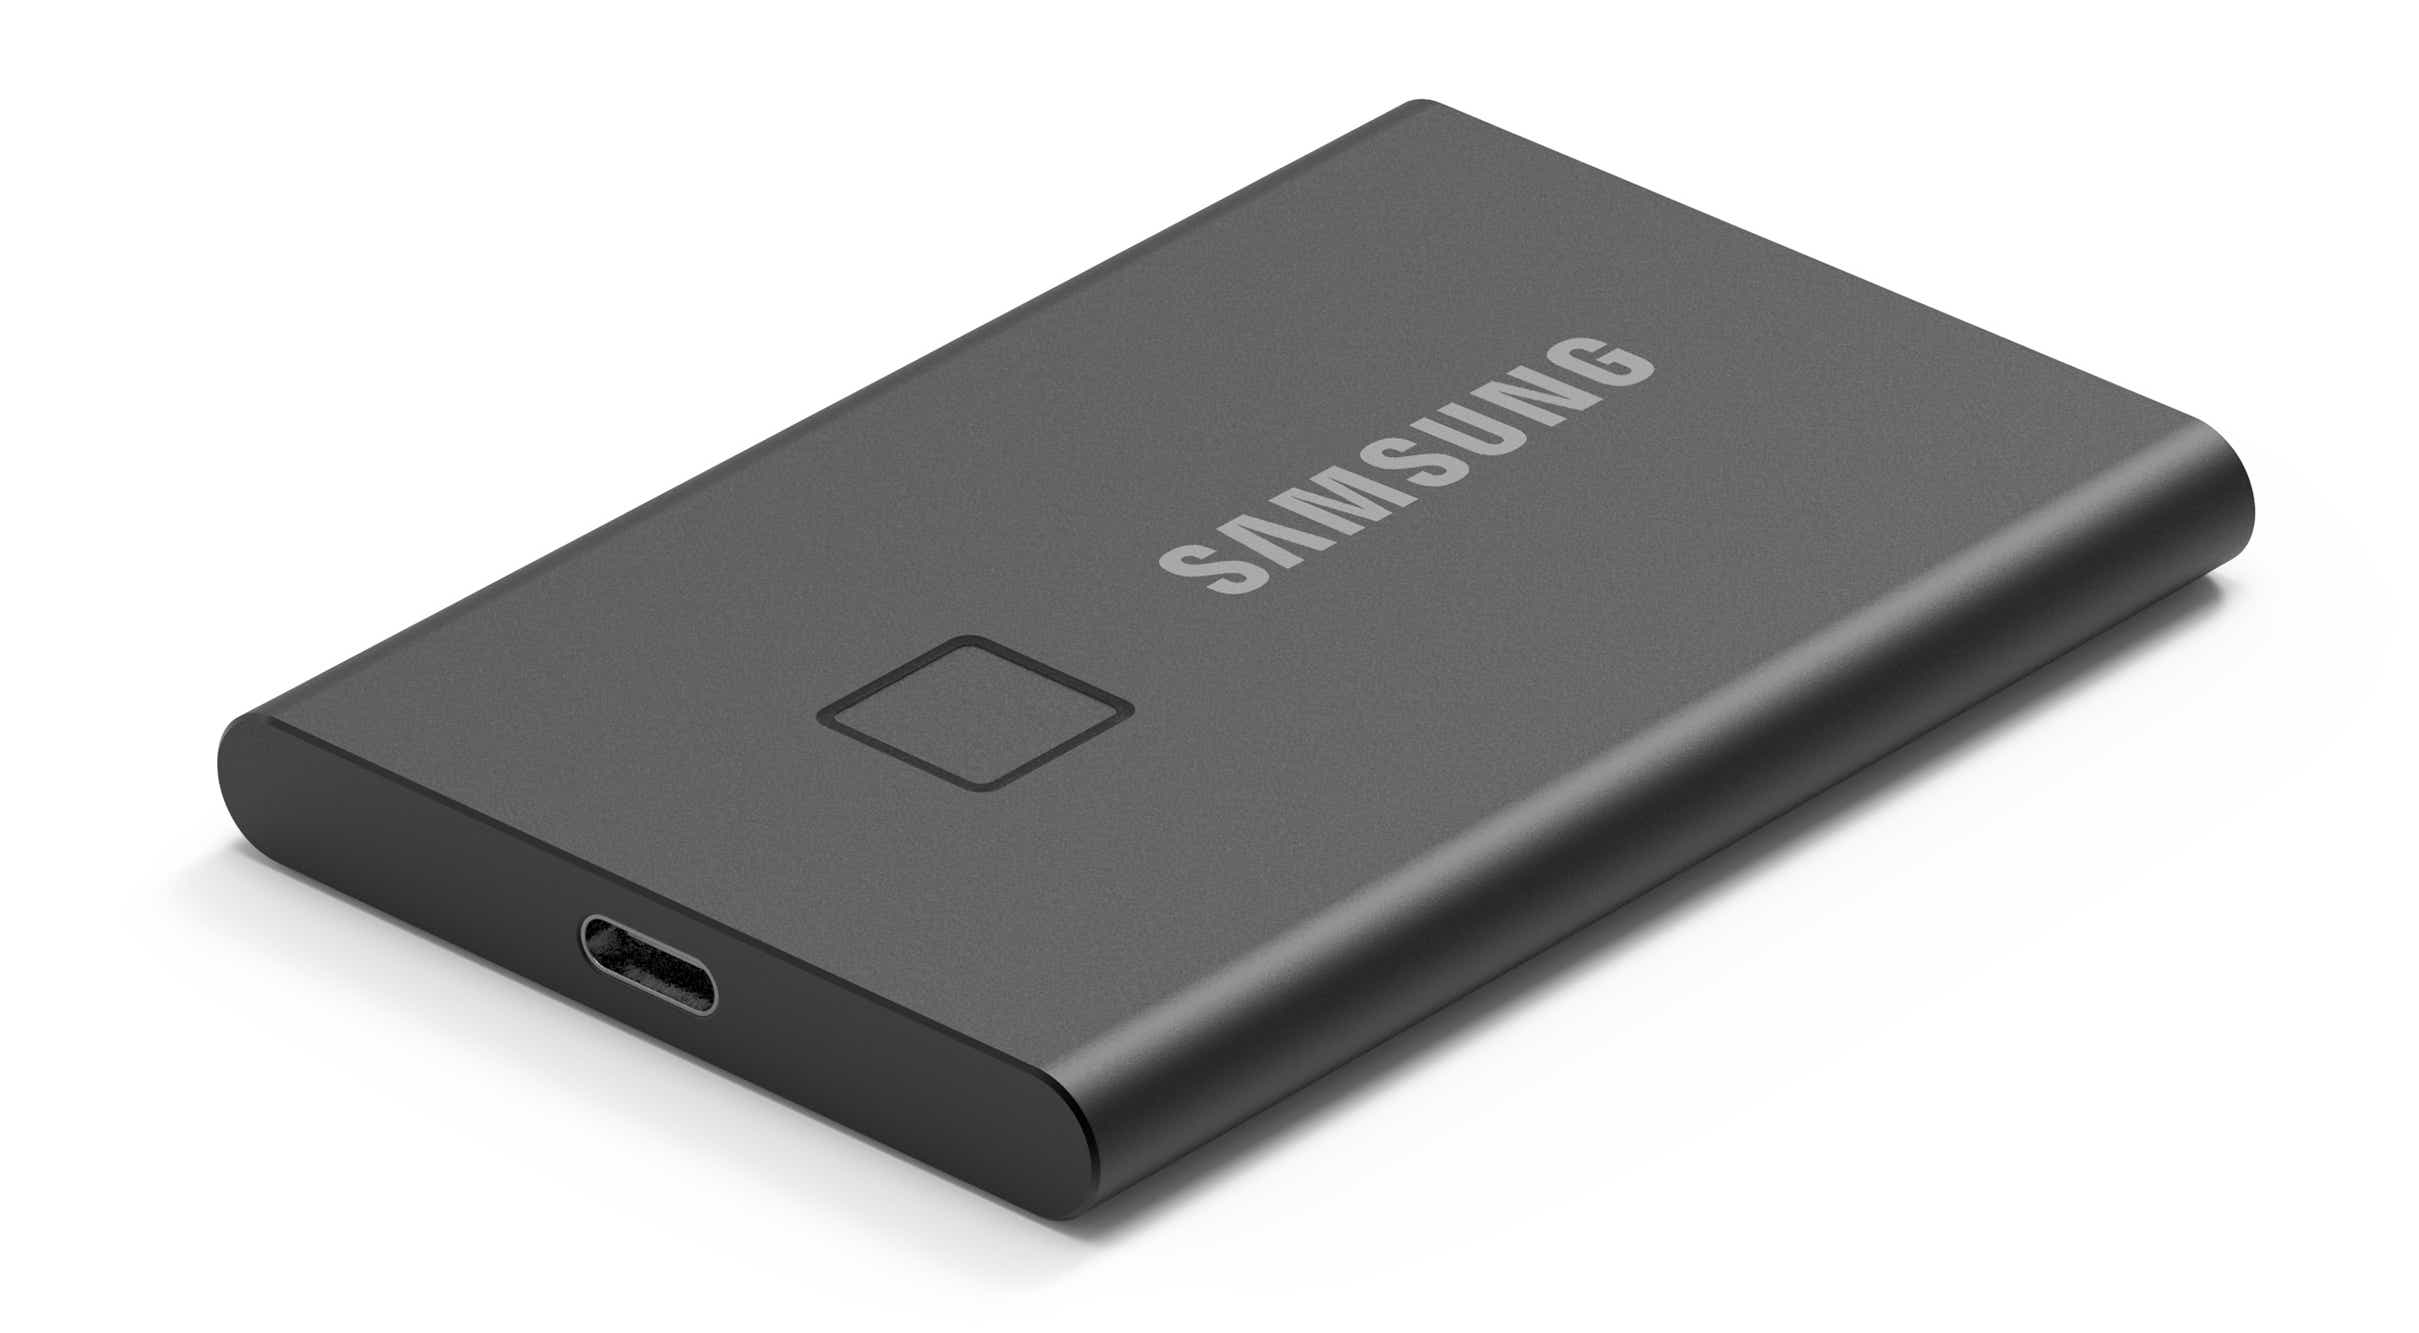 Samsung Portable SSD T7 Touch (500GB) - Best performance runner-up